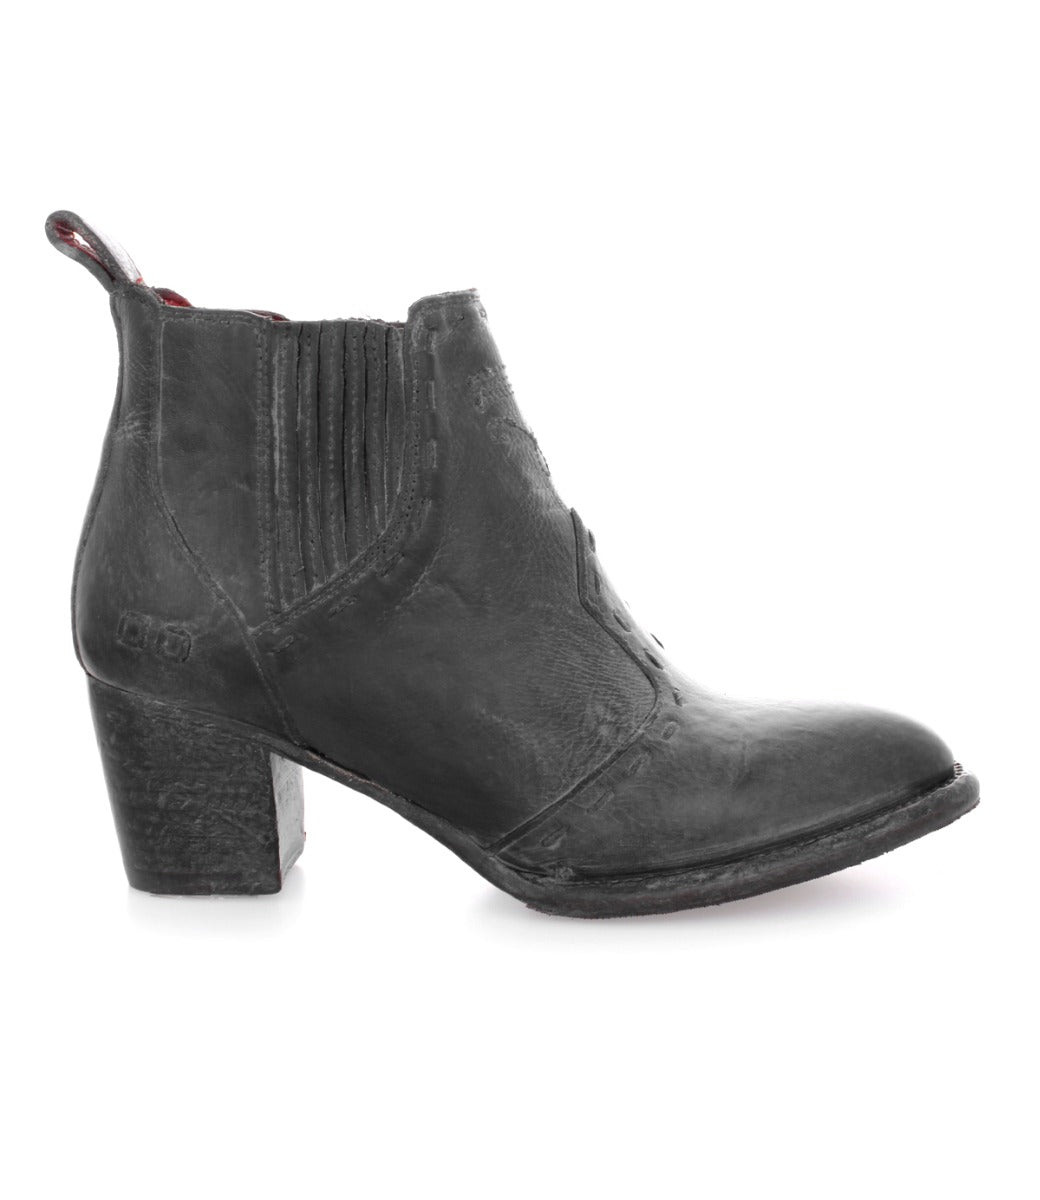 A women's black ankle boot with a wooden heel called the Brie II by Bed Stu.